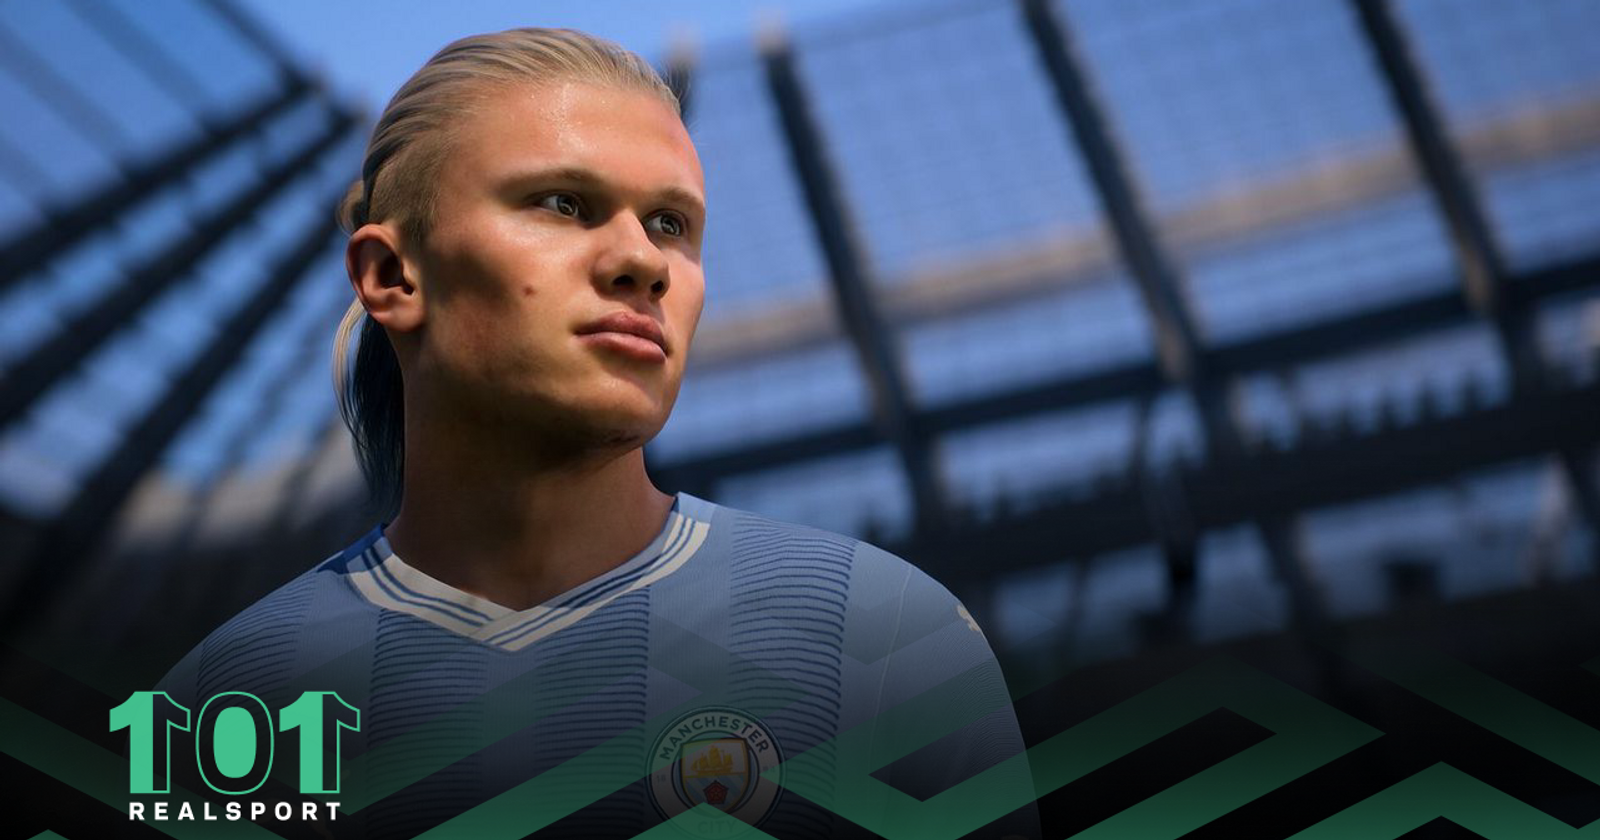 FIFA 22 Adds Exclusive Partnership With Serie A, Plus Other Updates